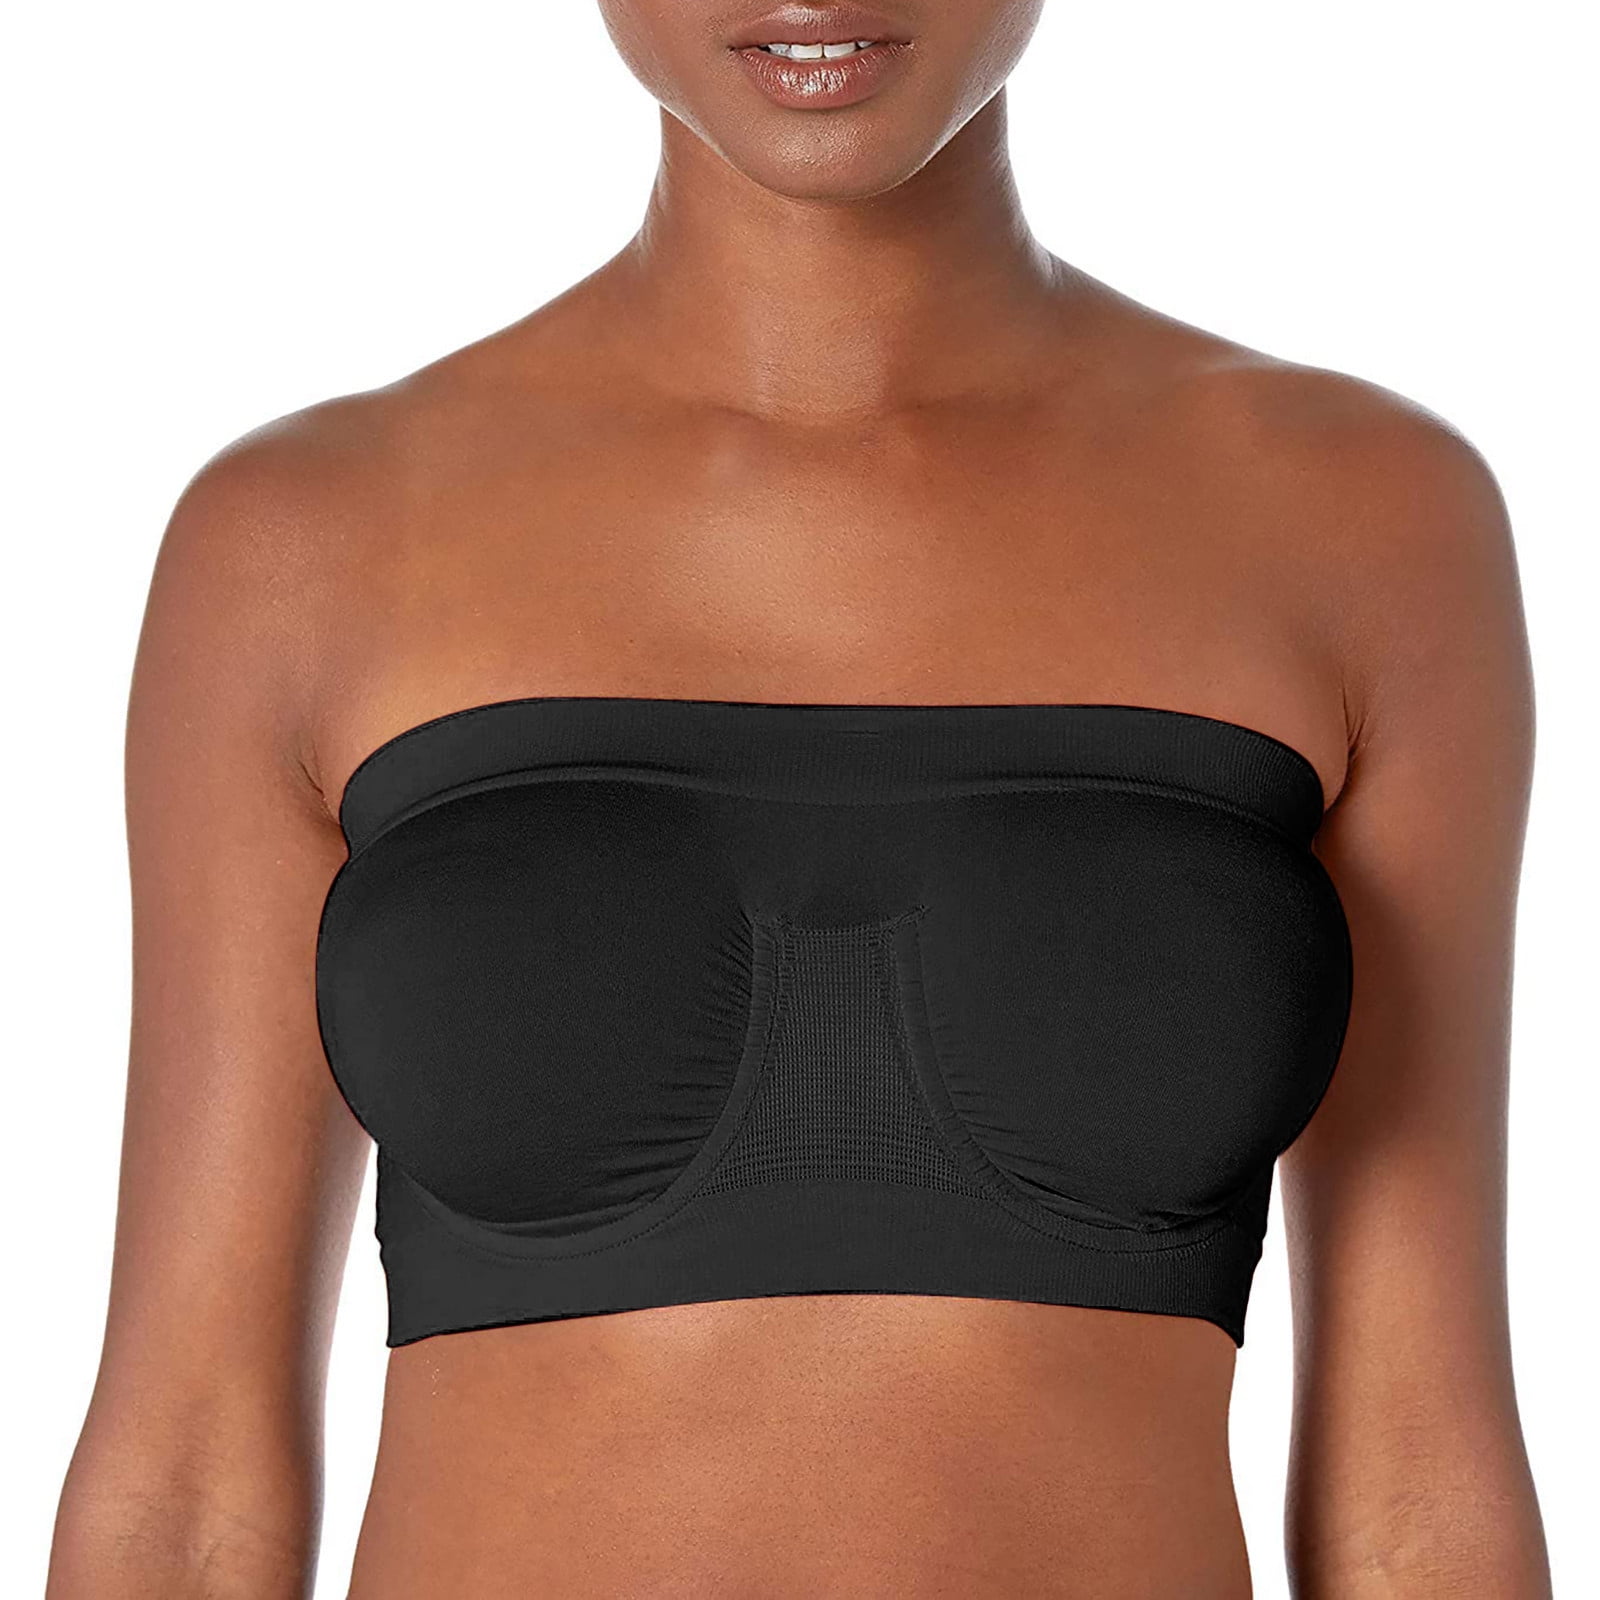 YUNAFFT Sports Bras for Women Plus Size Clearance Women's Stretch